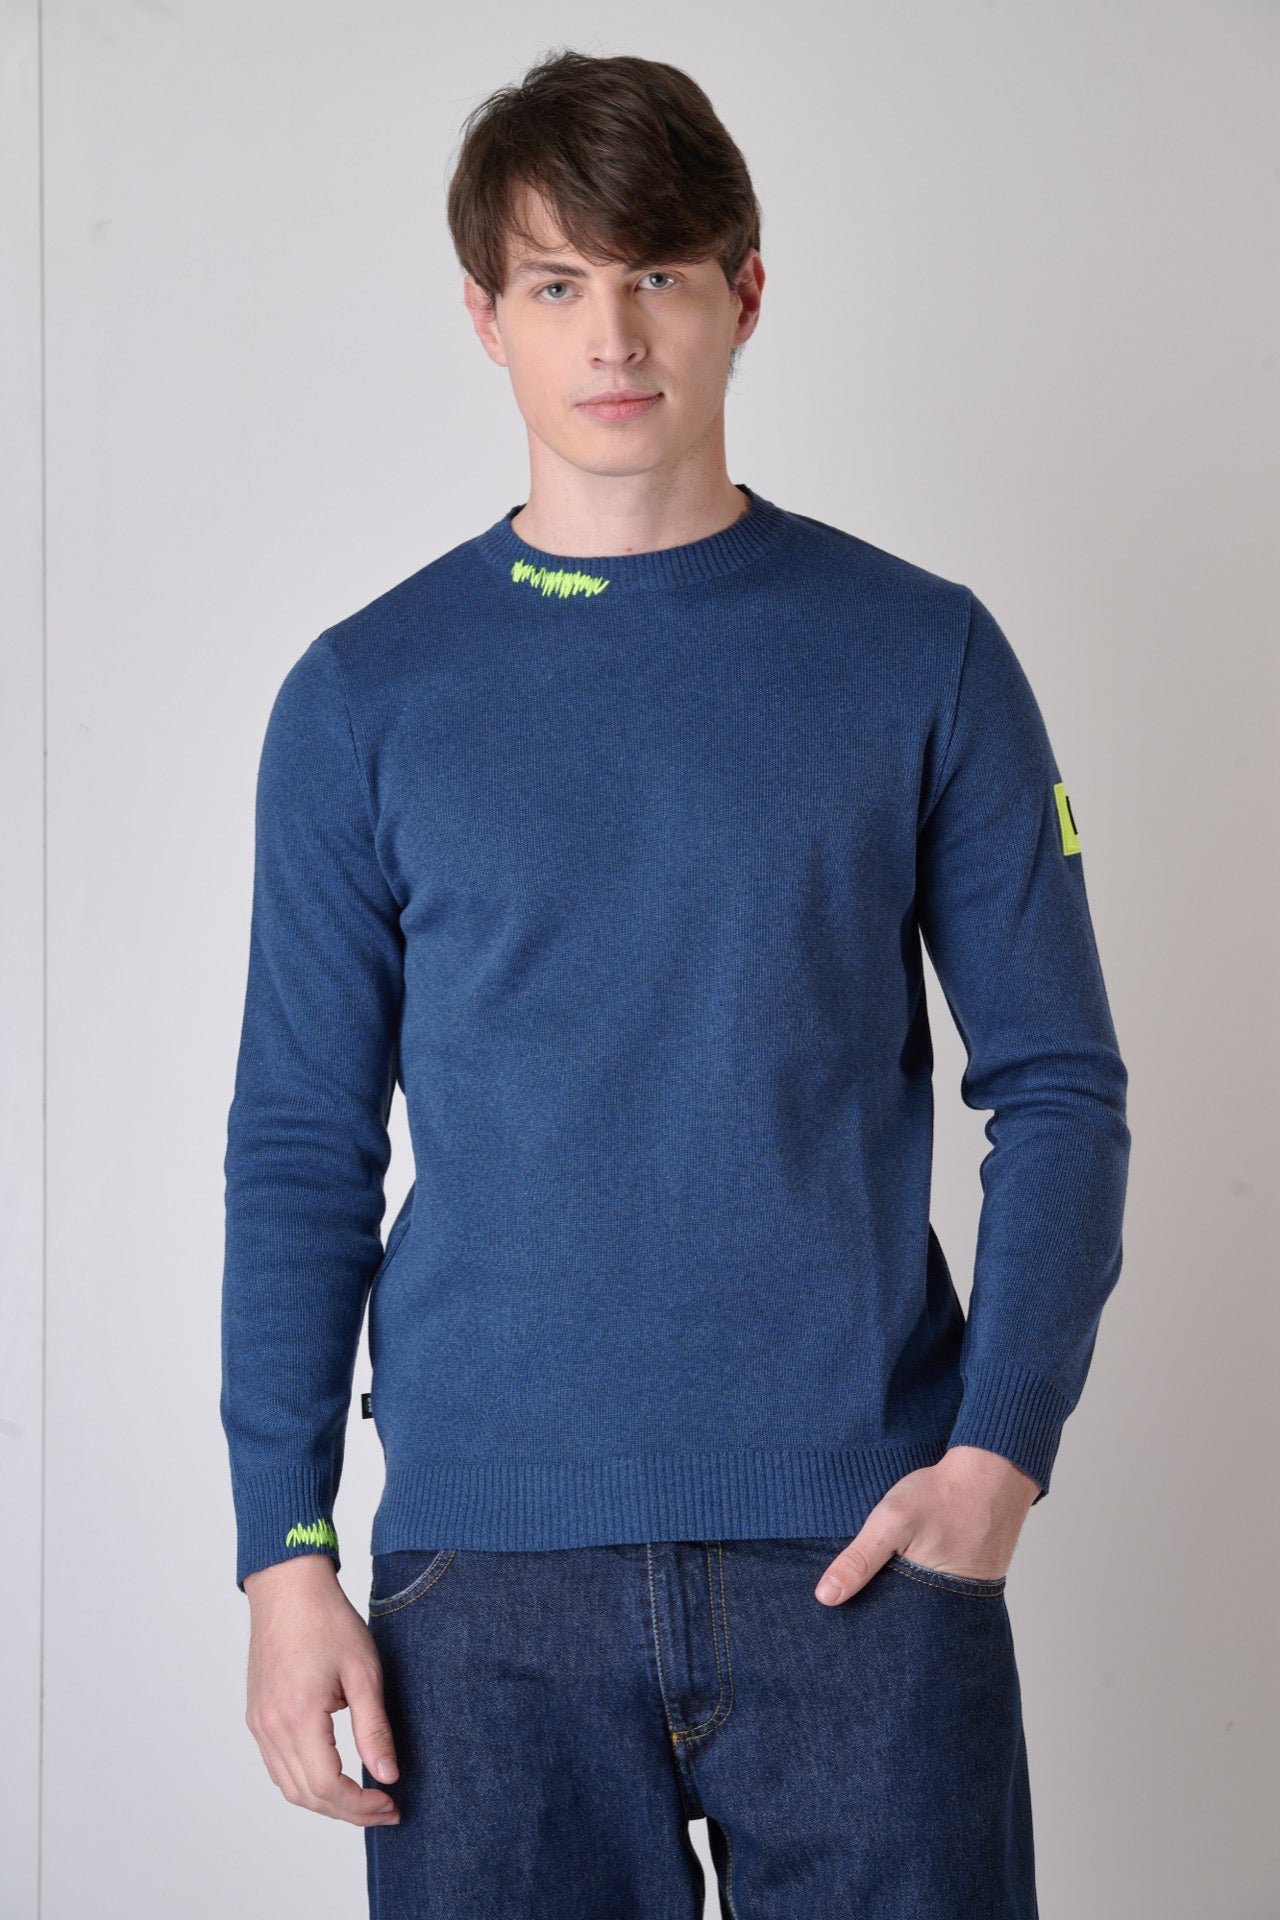 Jeans fabric stitch sweater with embroidery and V2 patch on the arm